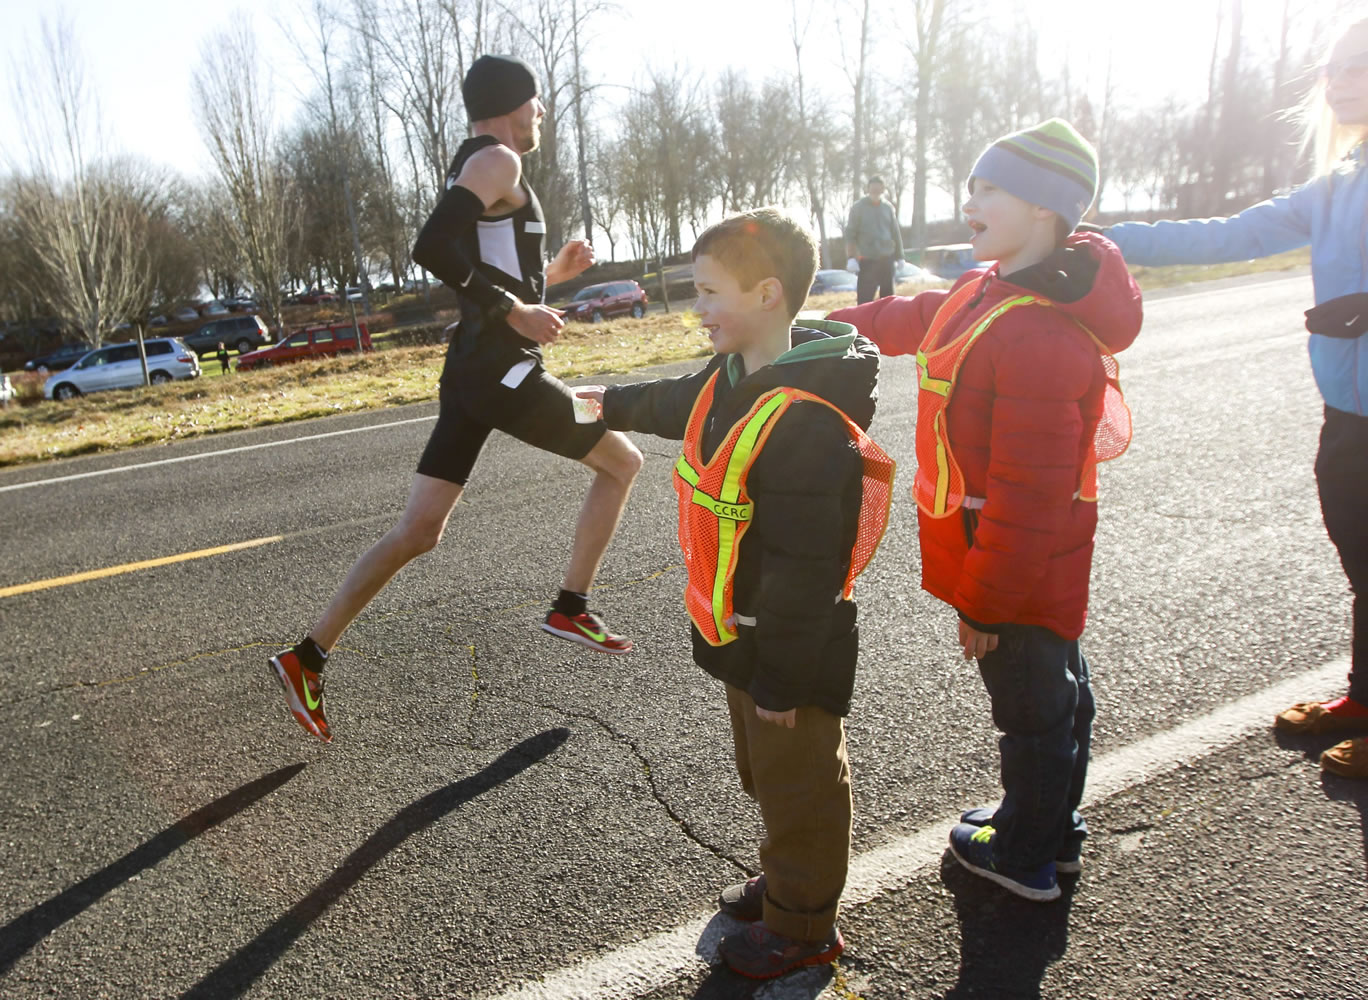 Volunteers offer water to runner Johnson Lee as he passes in the annual Vancouver Lake Half Marathon on Sunday.